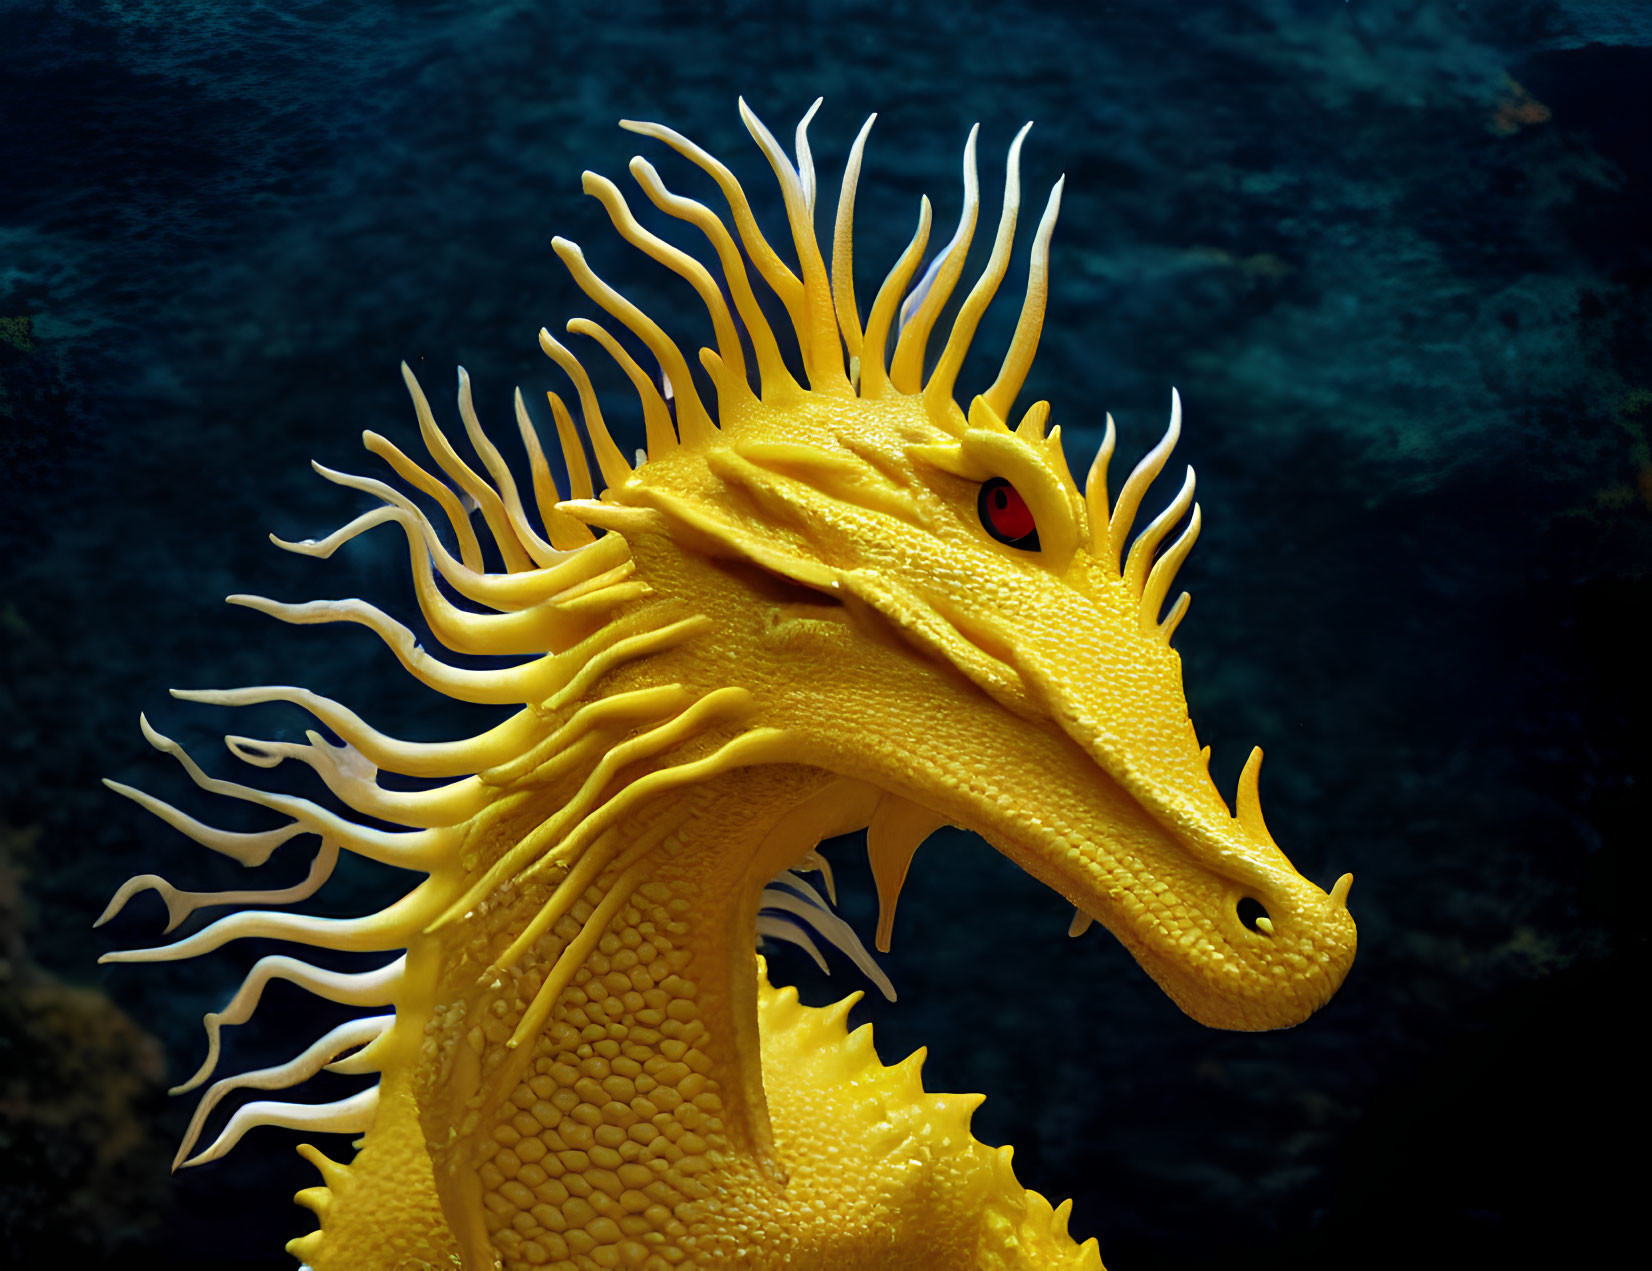 Colorful Yellow Seahorse with Elaborate Fin Frills in Dark Blue Ocean